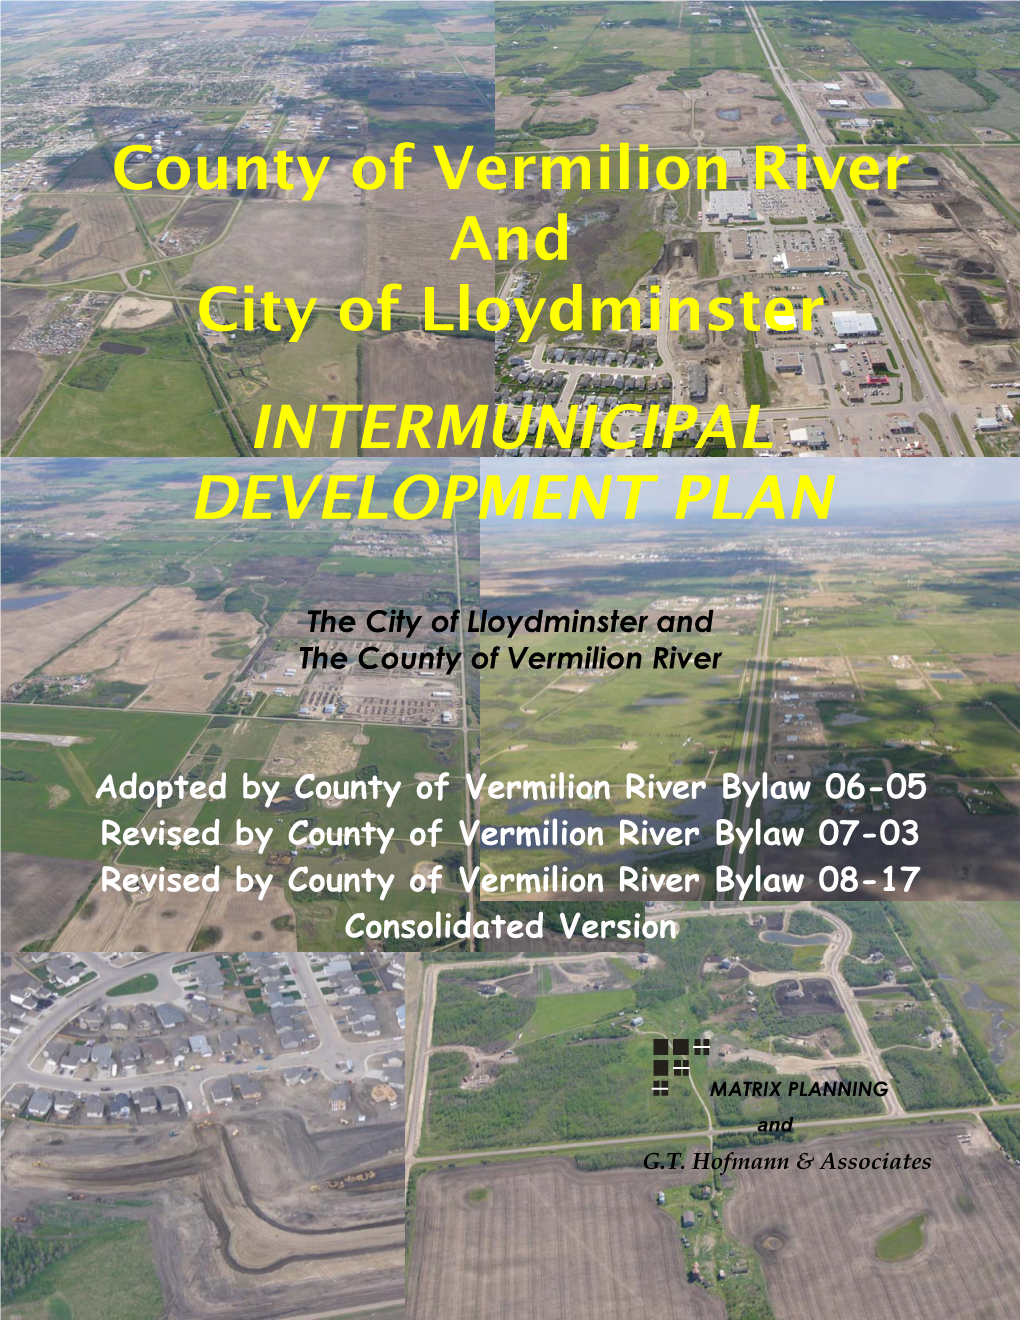 County of Vermilion River and City of Lloydminster INTERMUNICIPAL